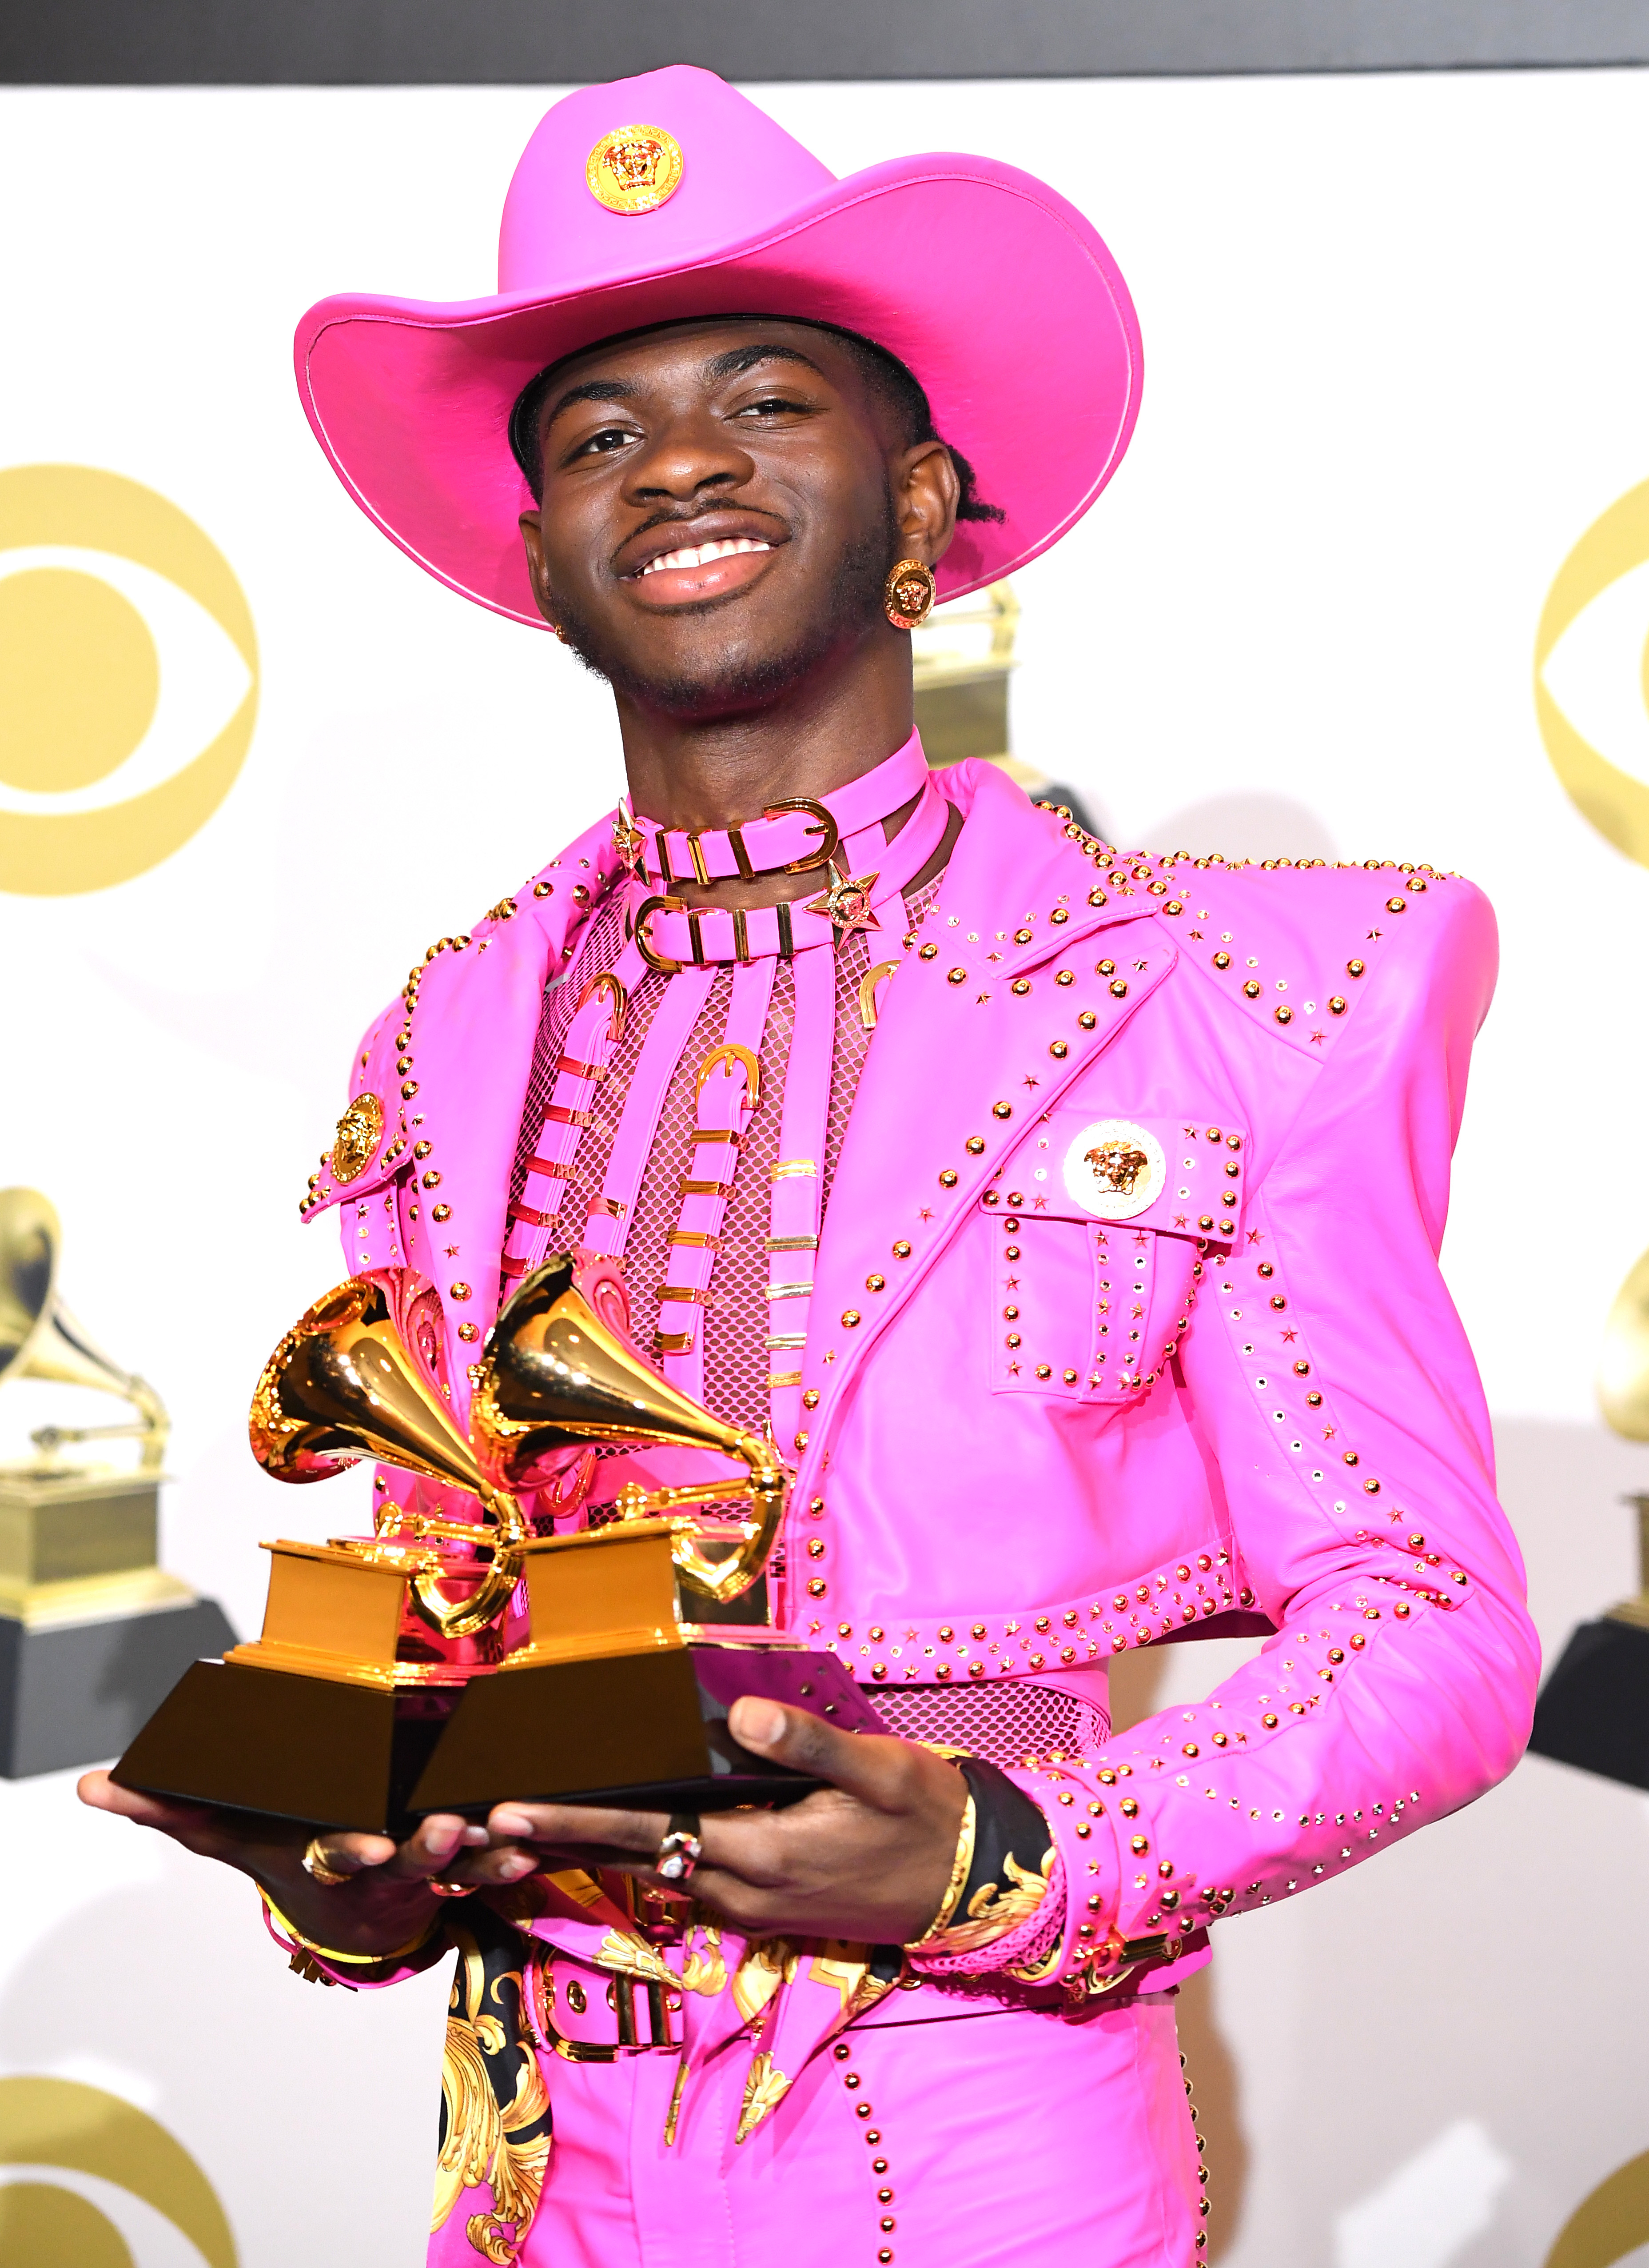 Lil Nas X in a vibrant pink cowboy outfit with gold details, holding Grammy Awards